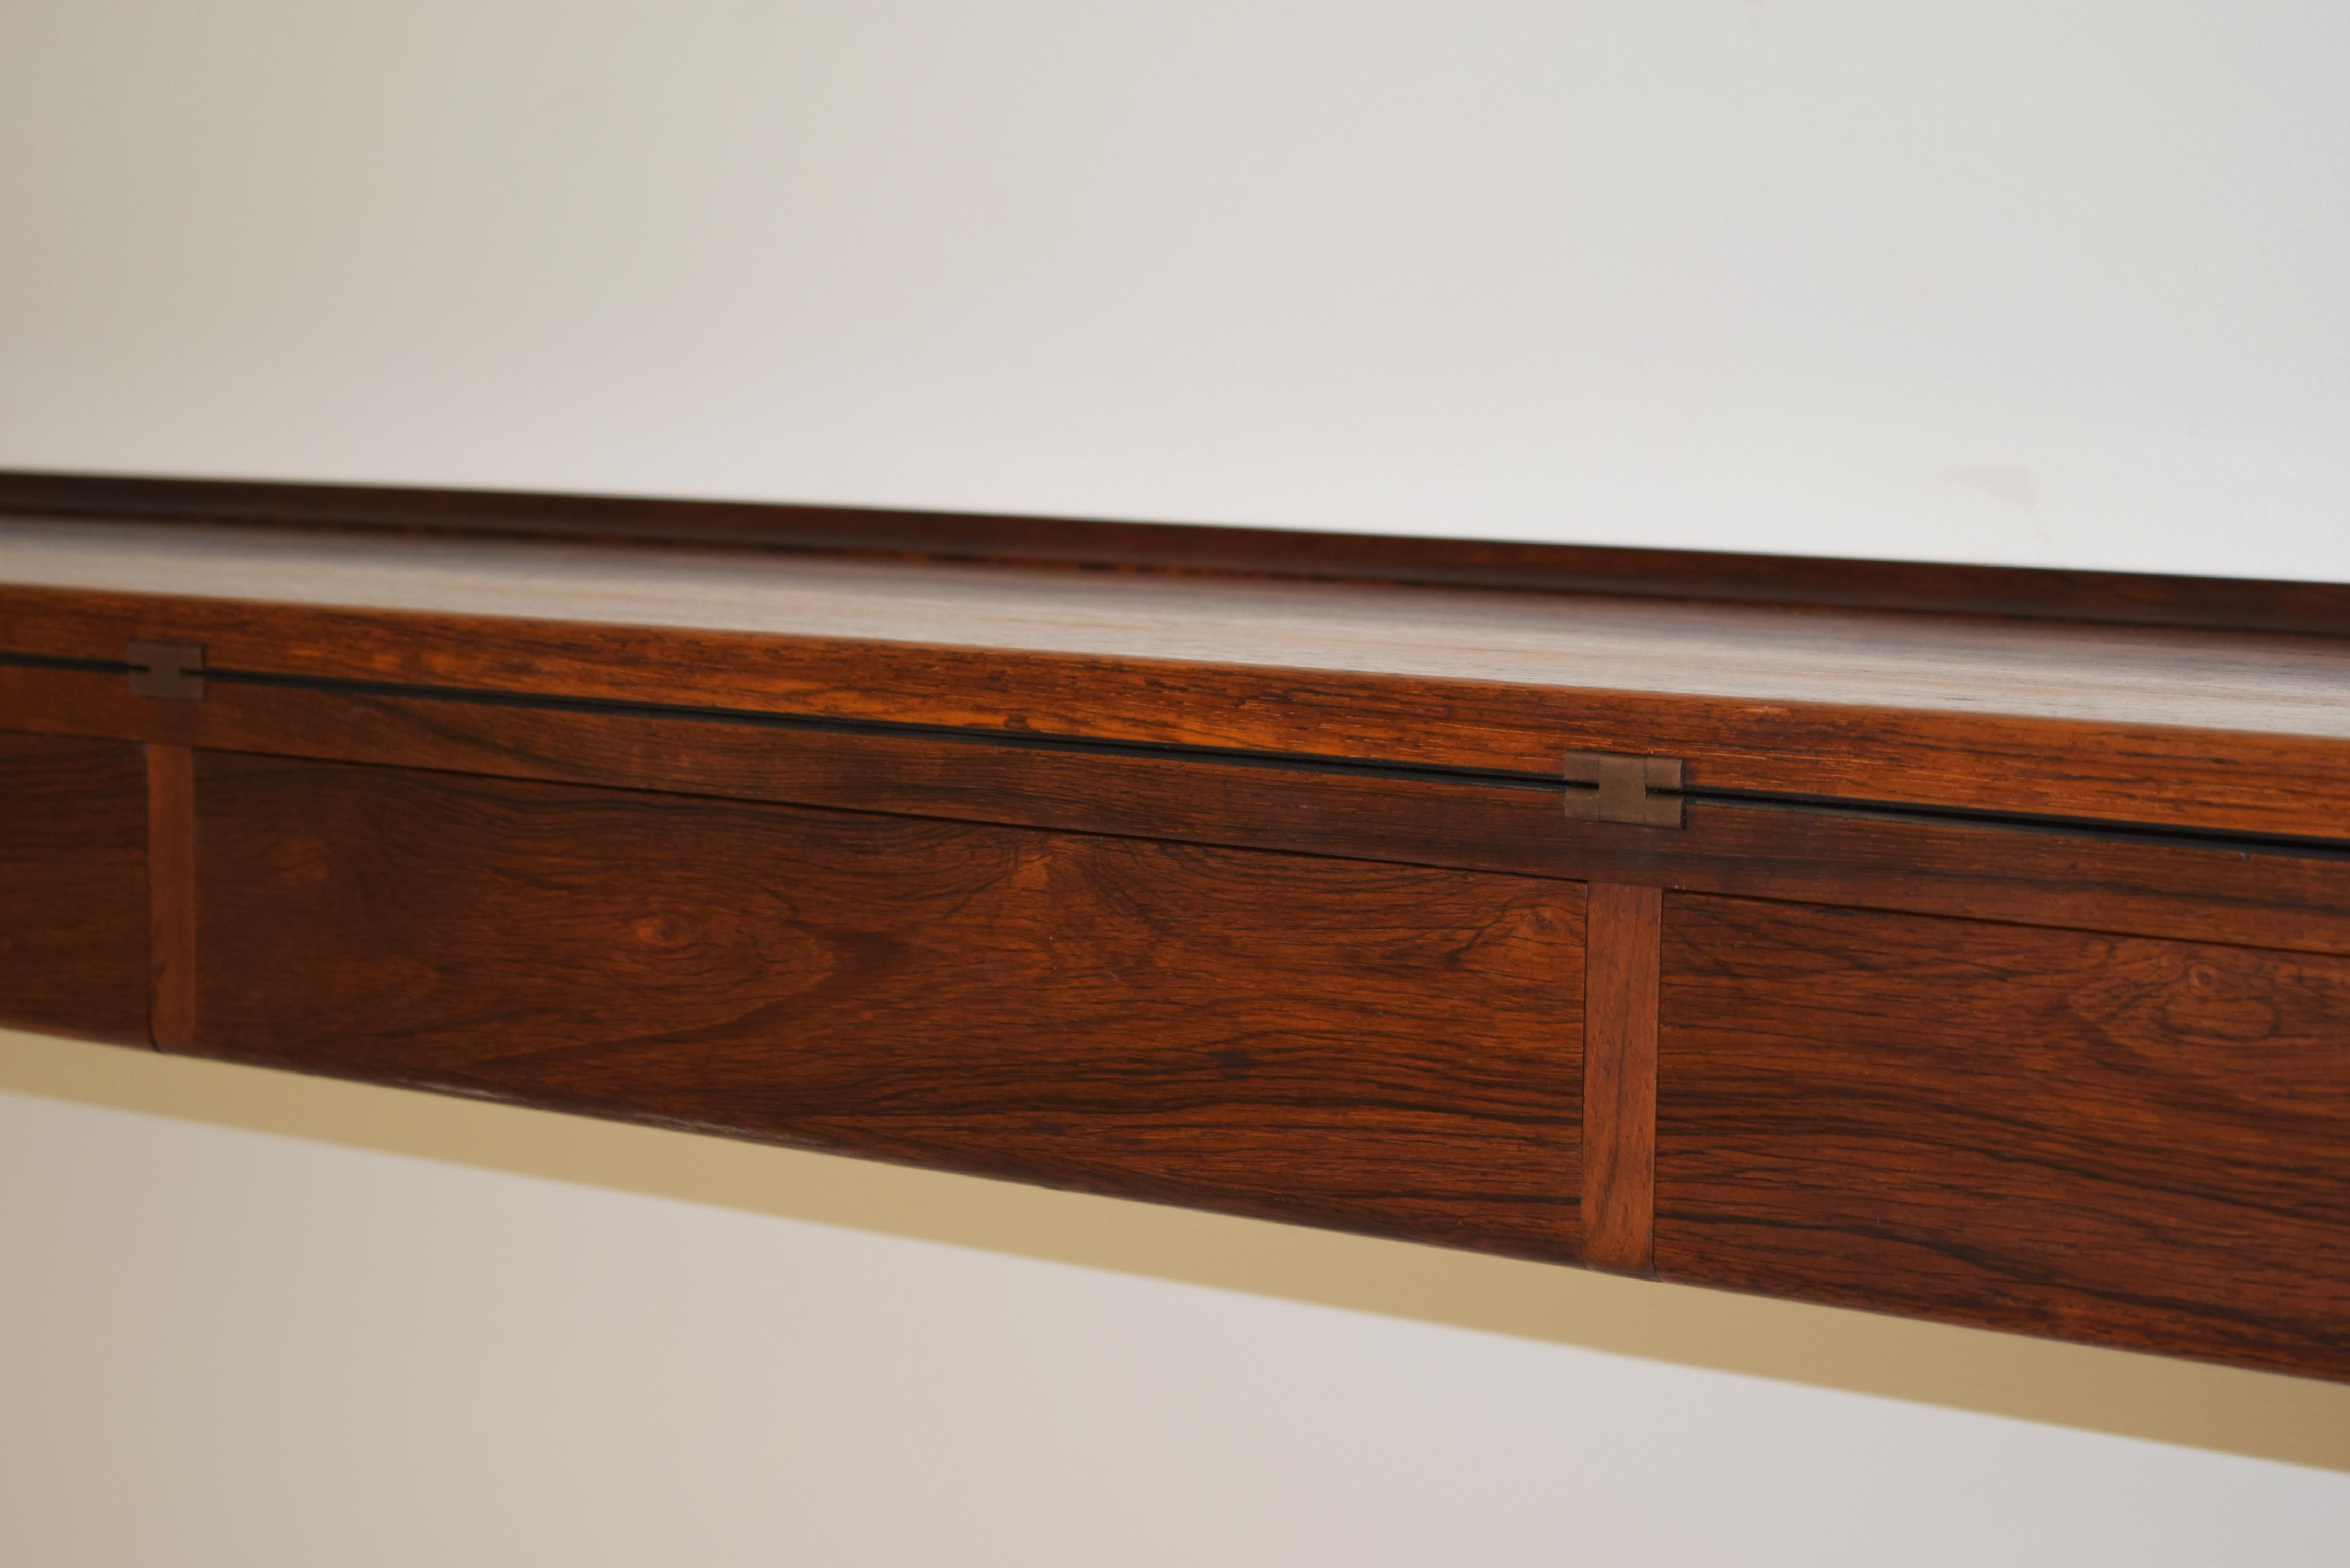 Wall-Mounted Rosewood Flip-Top Desk and Console by Arne Hovmand Olsen, Denmark 1